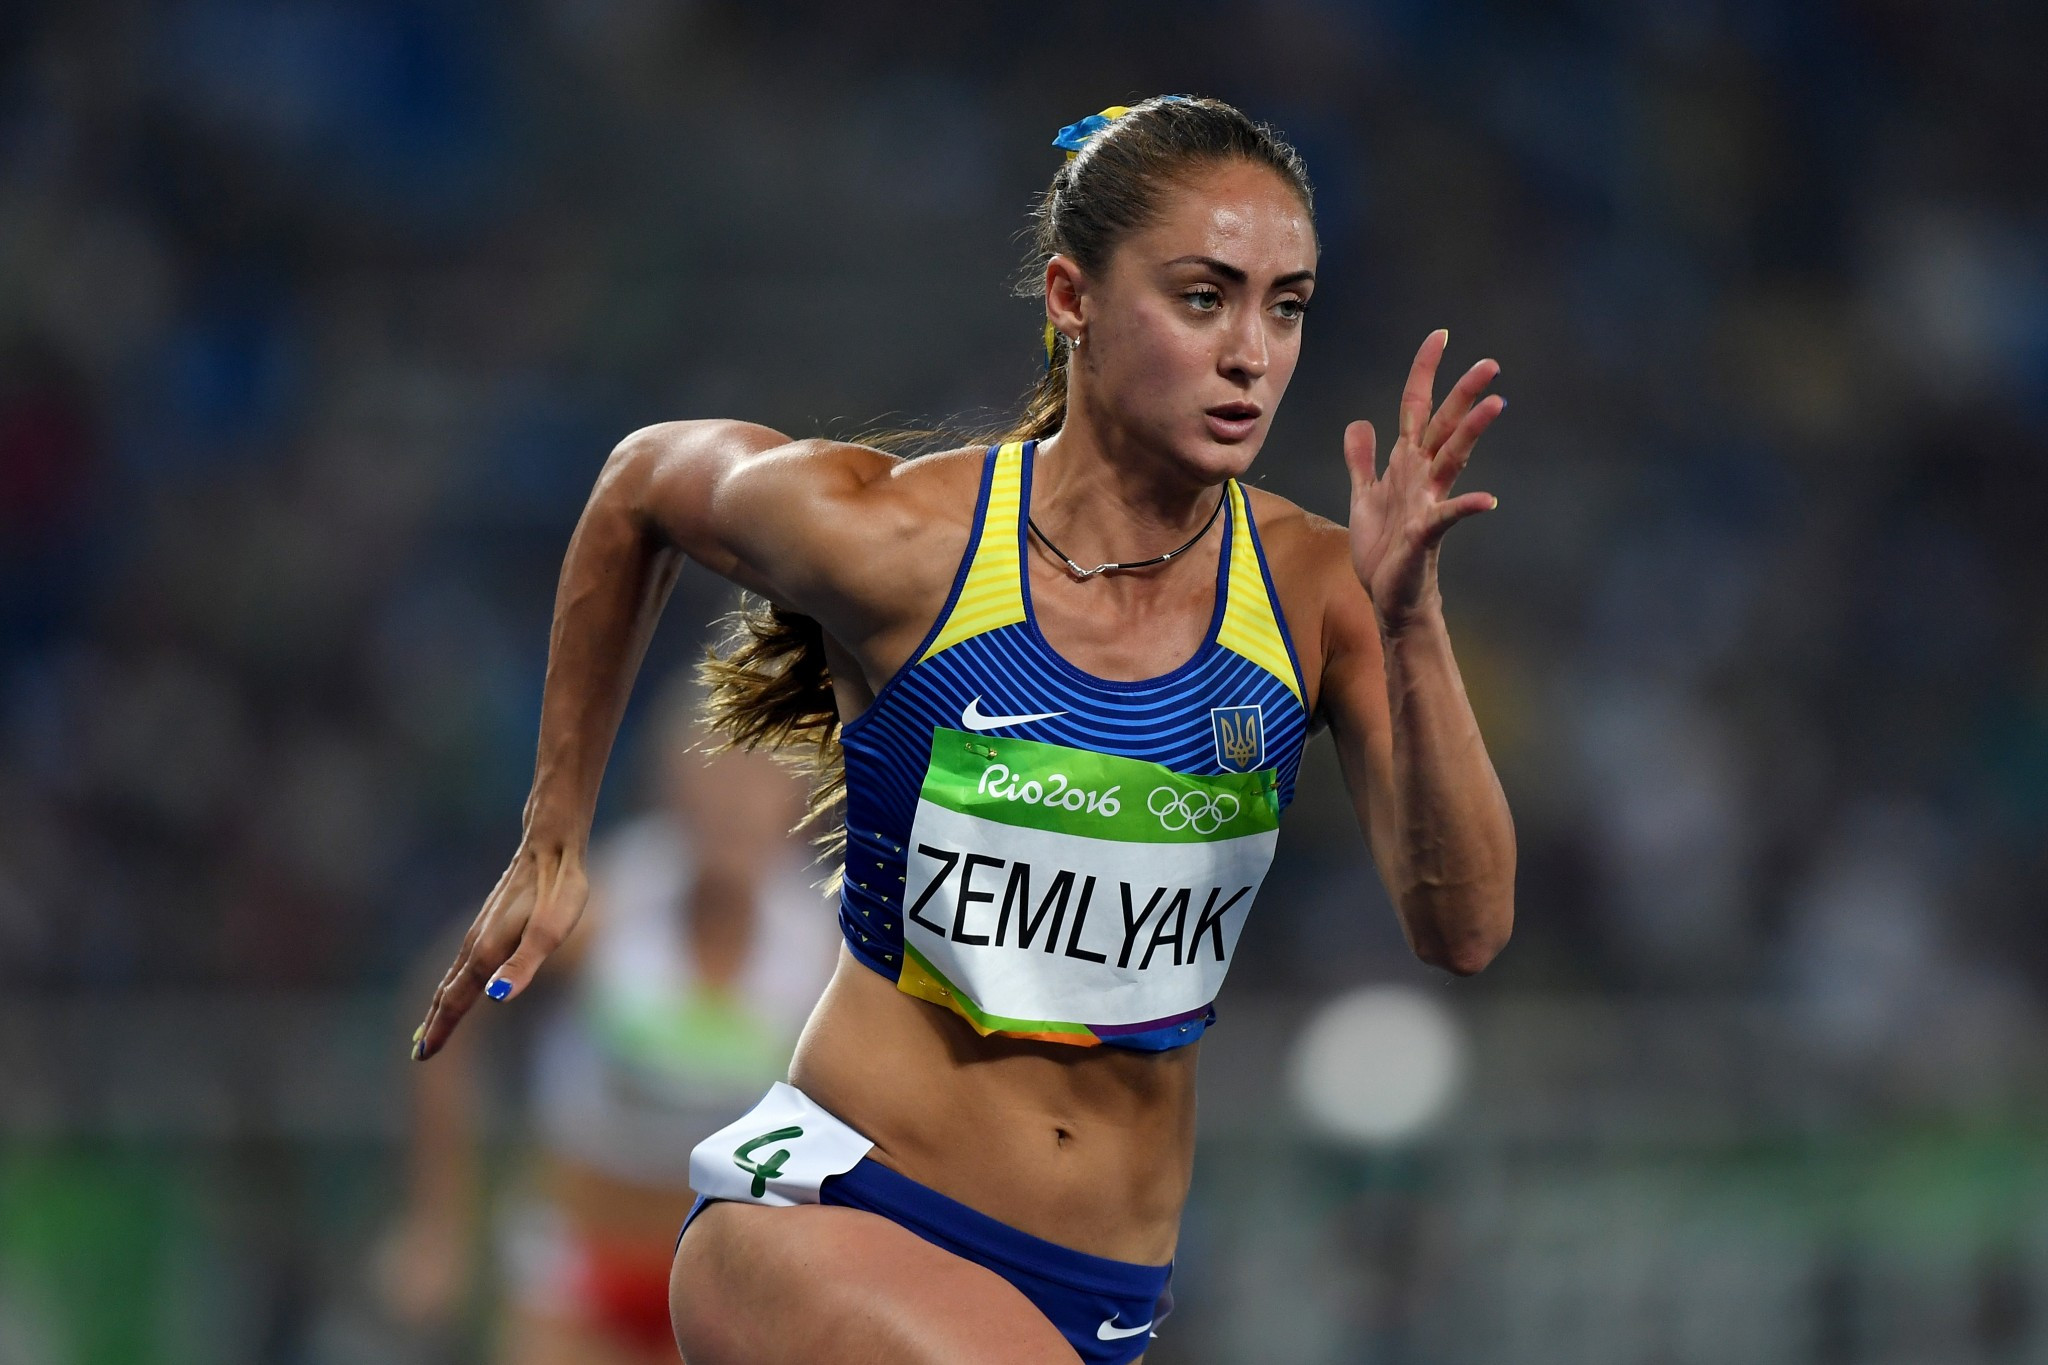 Ukraine's Olha Zemlyak pictured competing in the 400 metres at last year's Olympic Games in Rio de Janeiro ©Getty Images